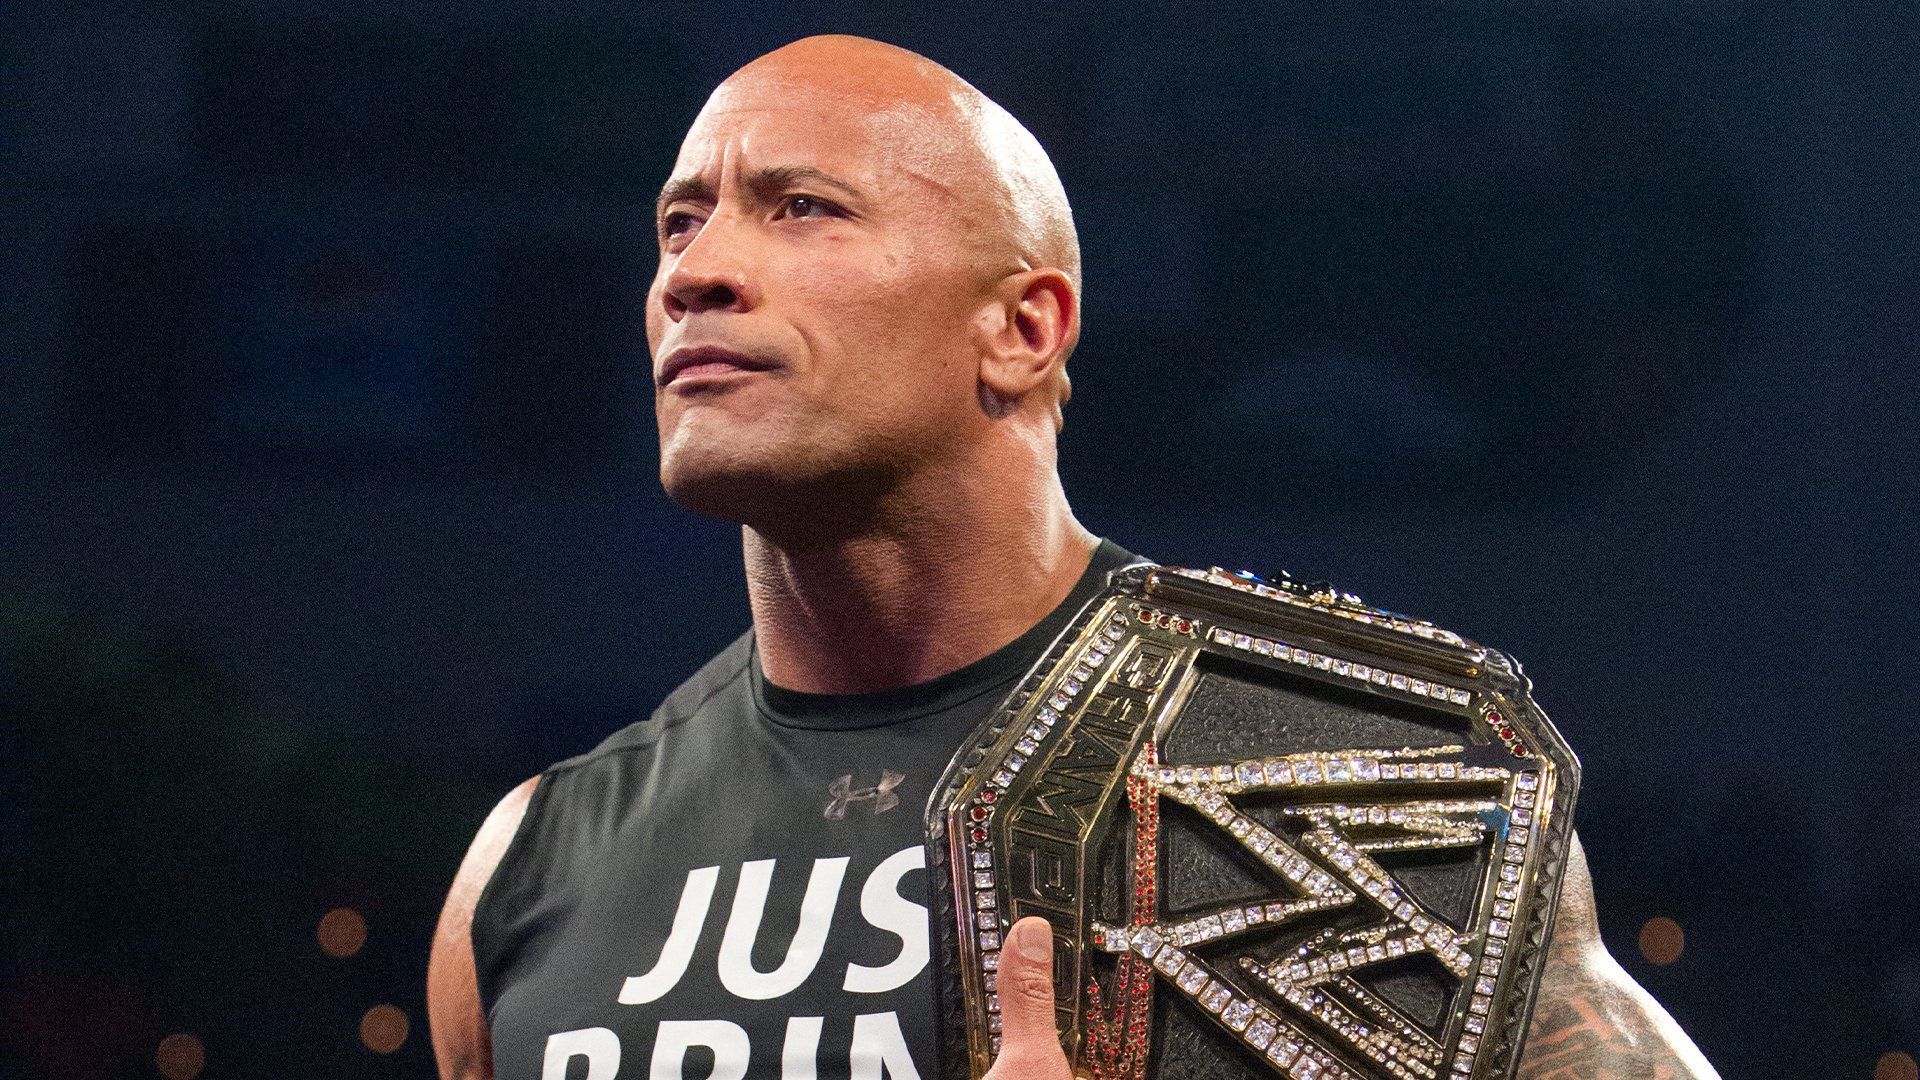 The Rock could return to WWE